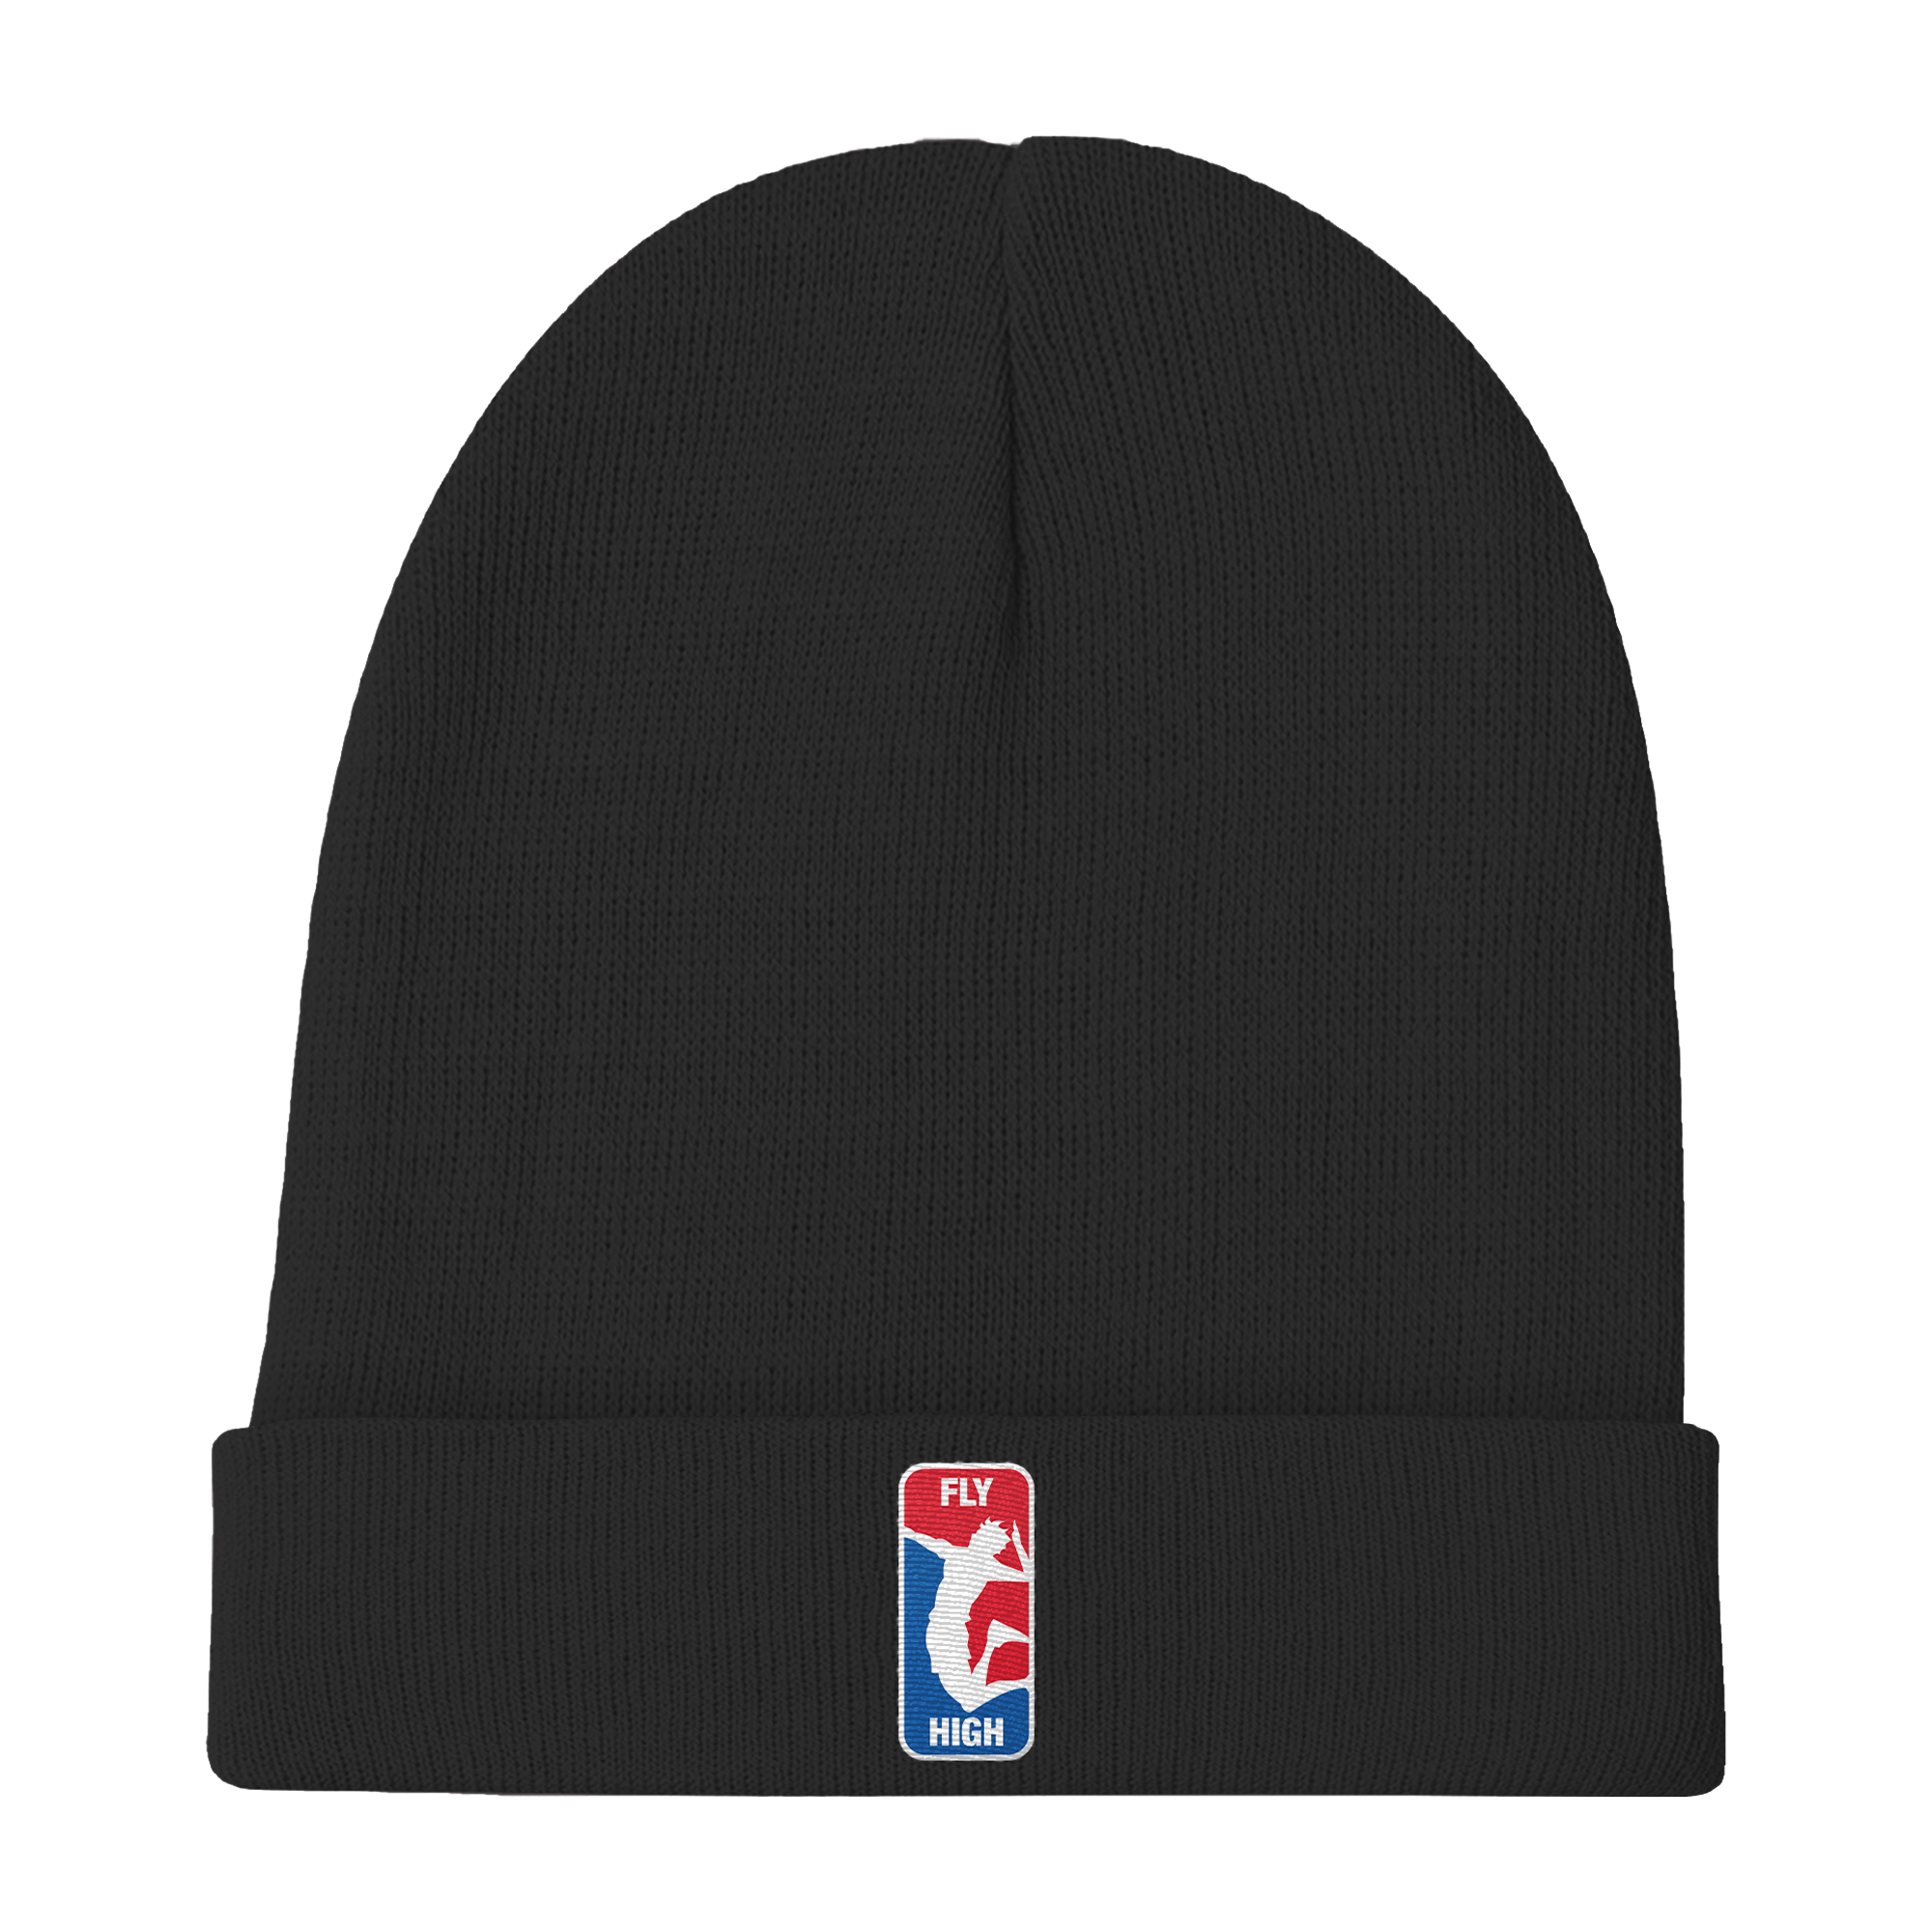 Fly High Beanie. Inspired by Haikyu and the NBA. It's a black beanie made from recycled bottle caps. It has the embroidered logo we've created for Fly High. Pretty Nerdy.